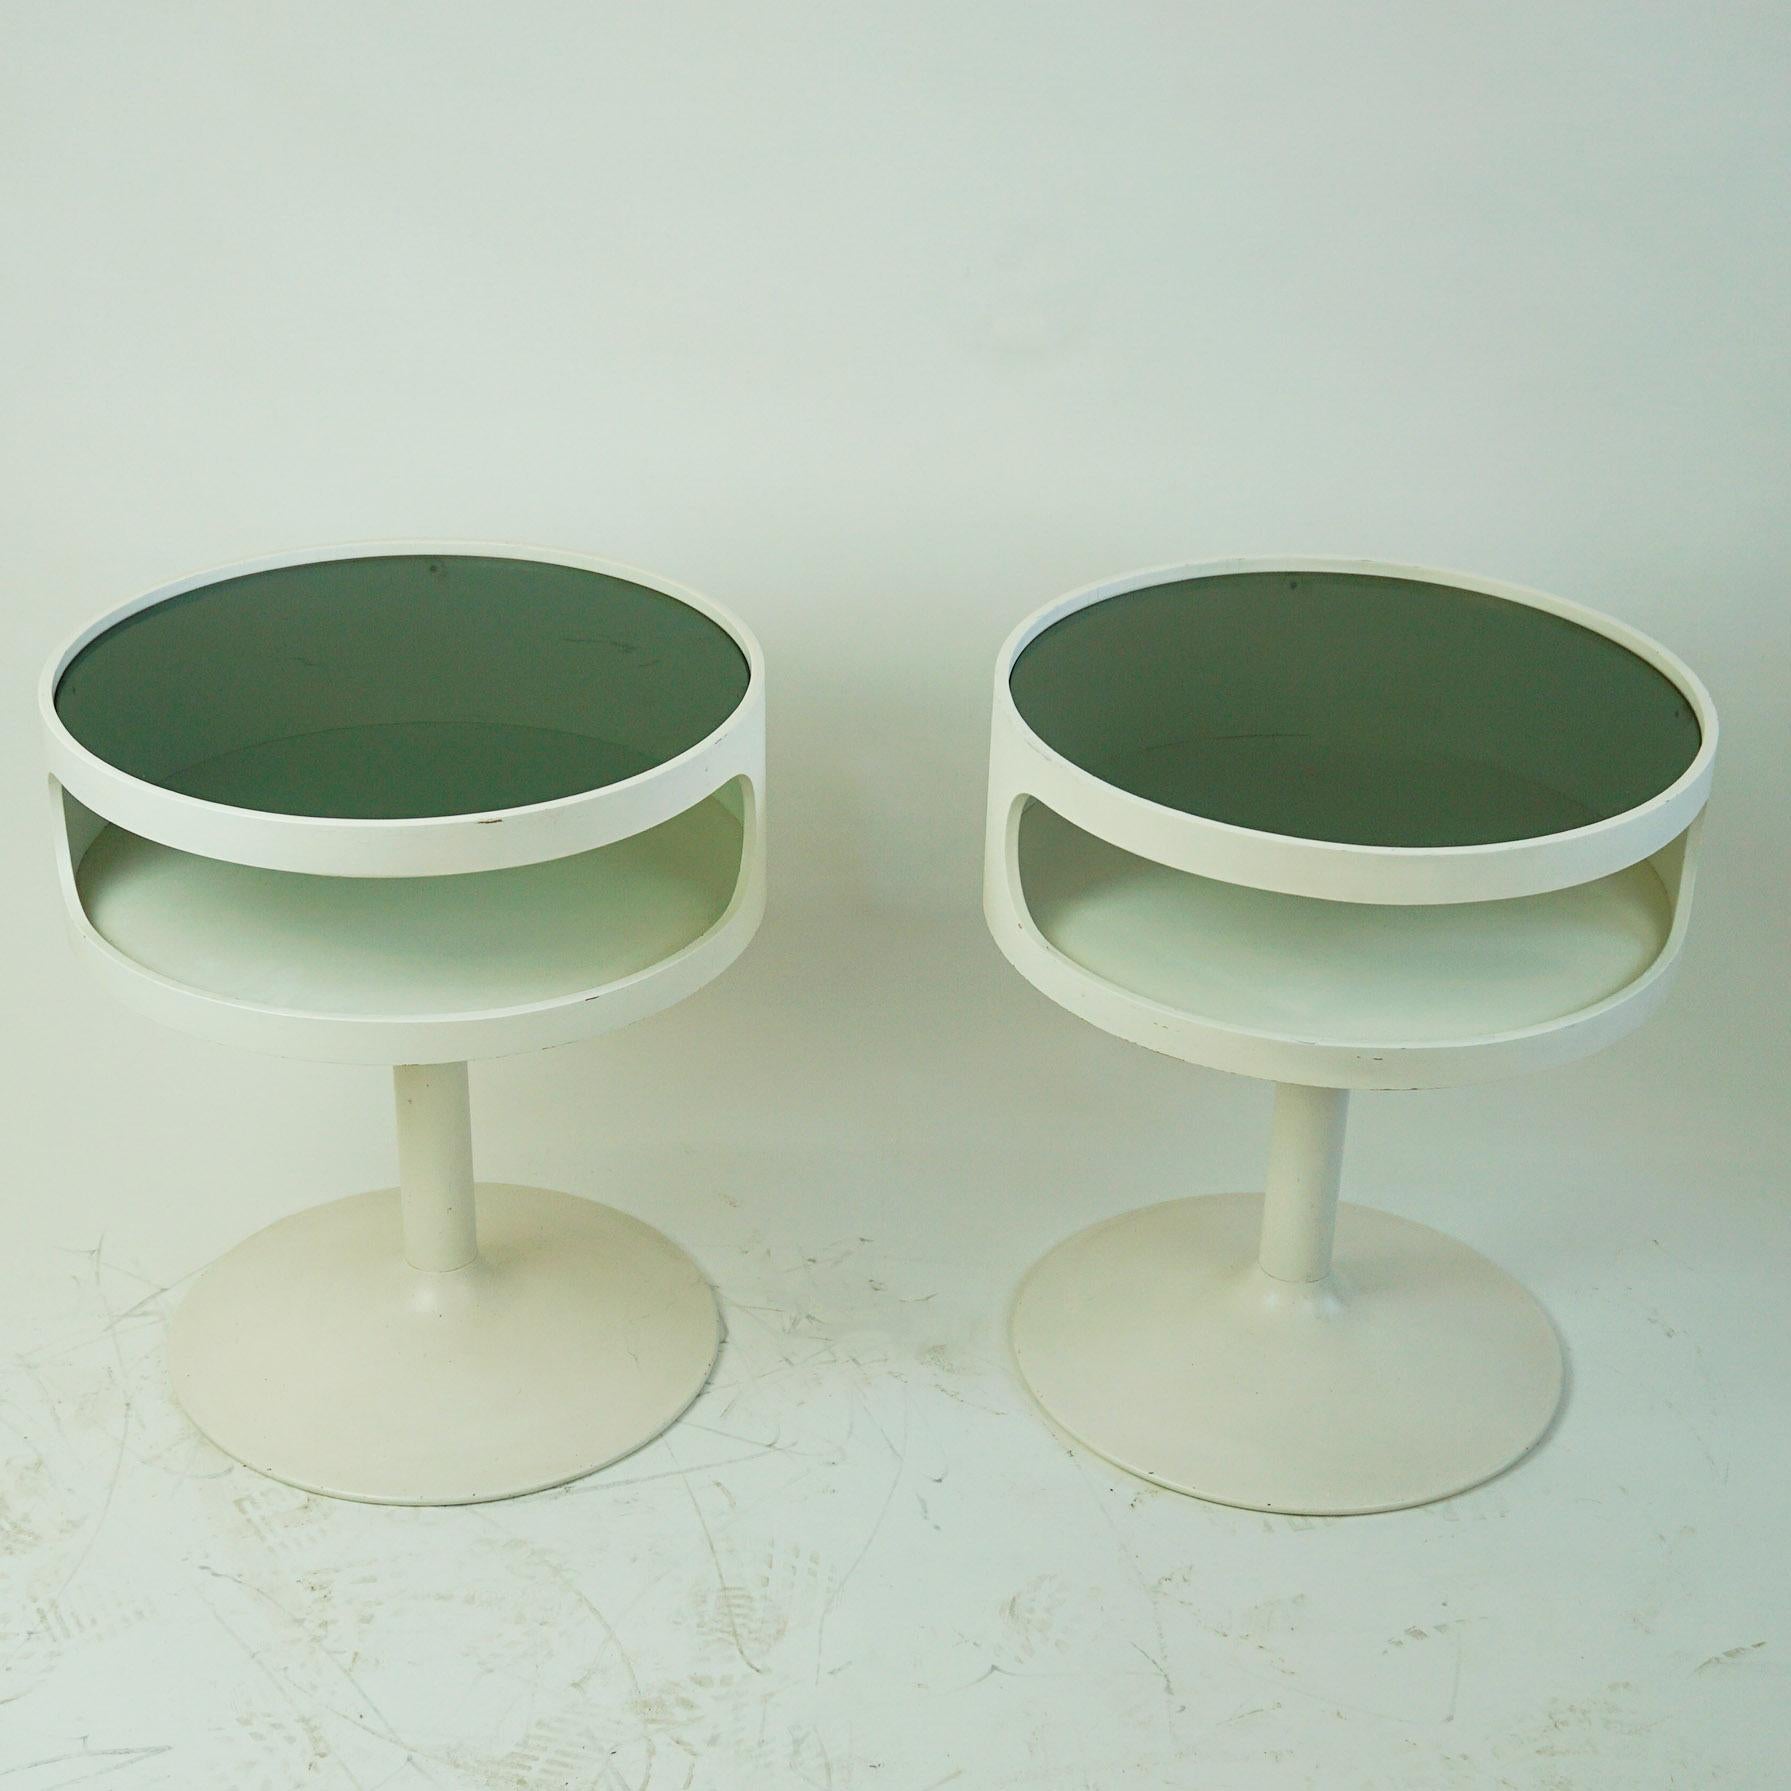 Charming white lacquered circular side tables with metal tulip base and glass top in very nice condition. The tables are produced in Germany by Opal Kleinmöbel in the late 1960s and one of them still shows the original manufacturers label on the